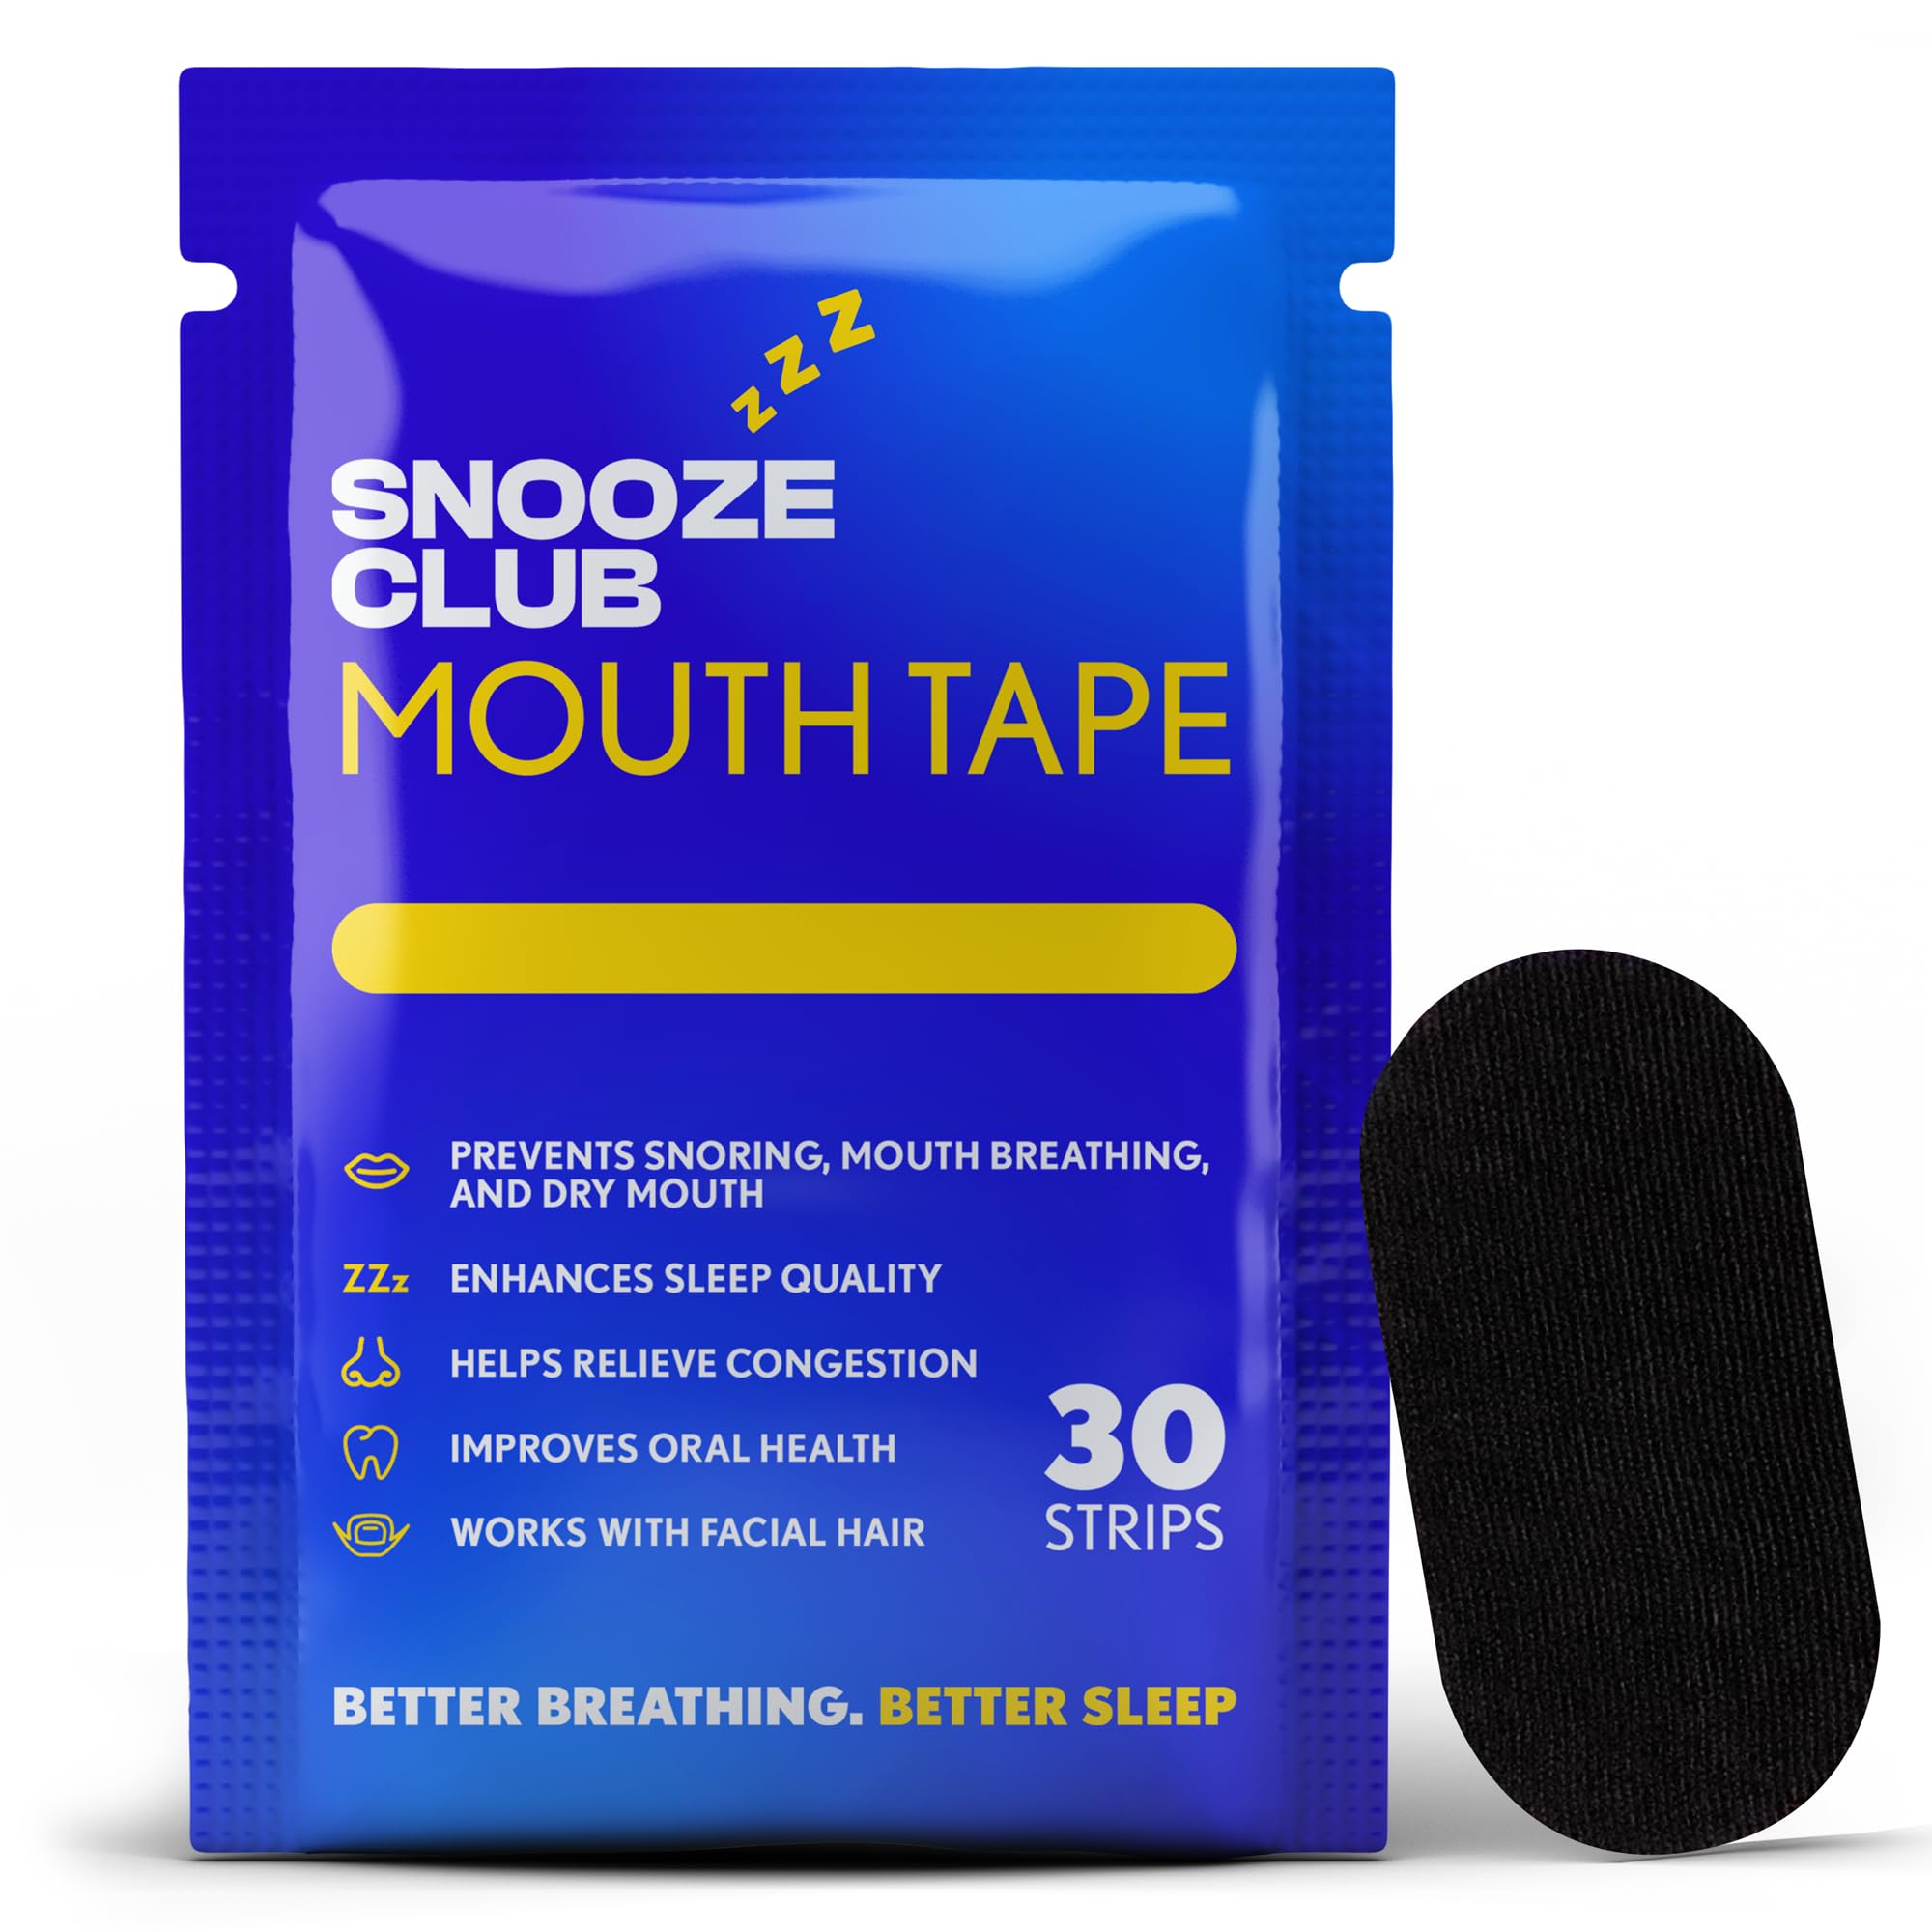 Snoring is bad for your sleep quality. Tape your mouth shut at